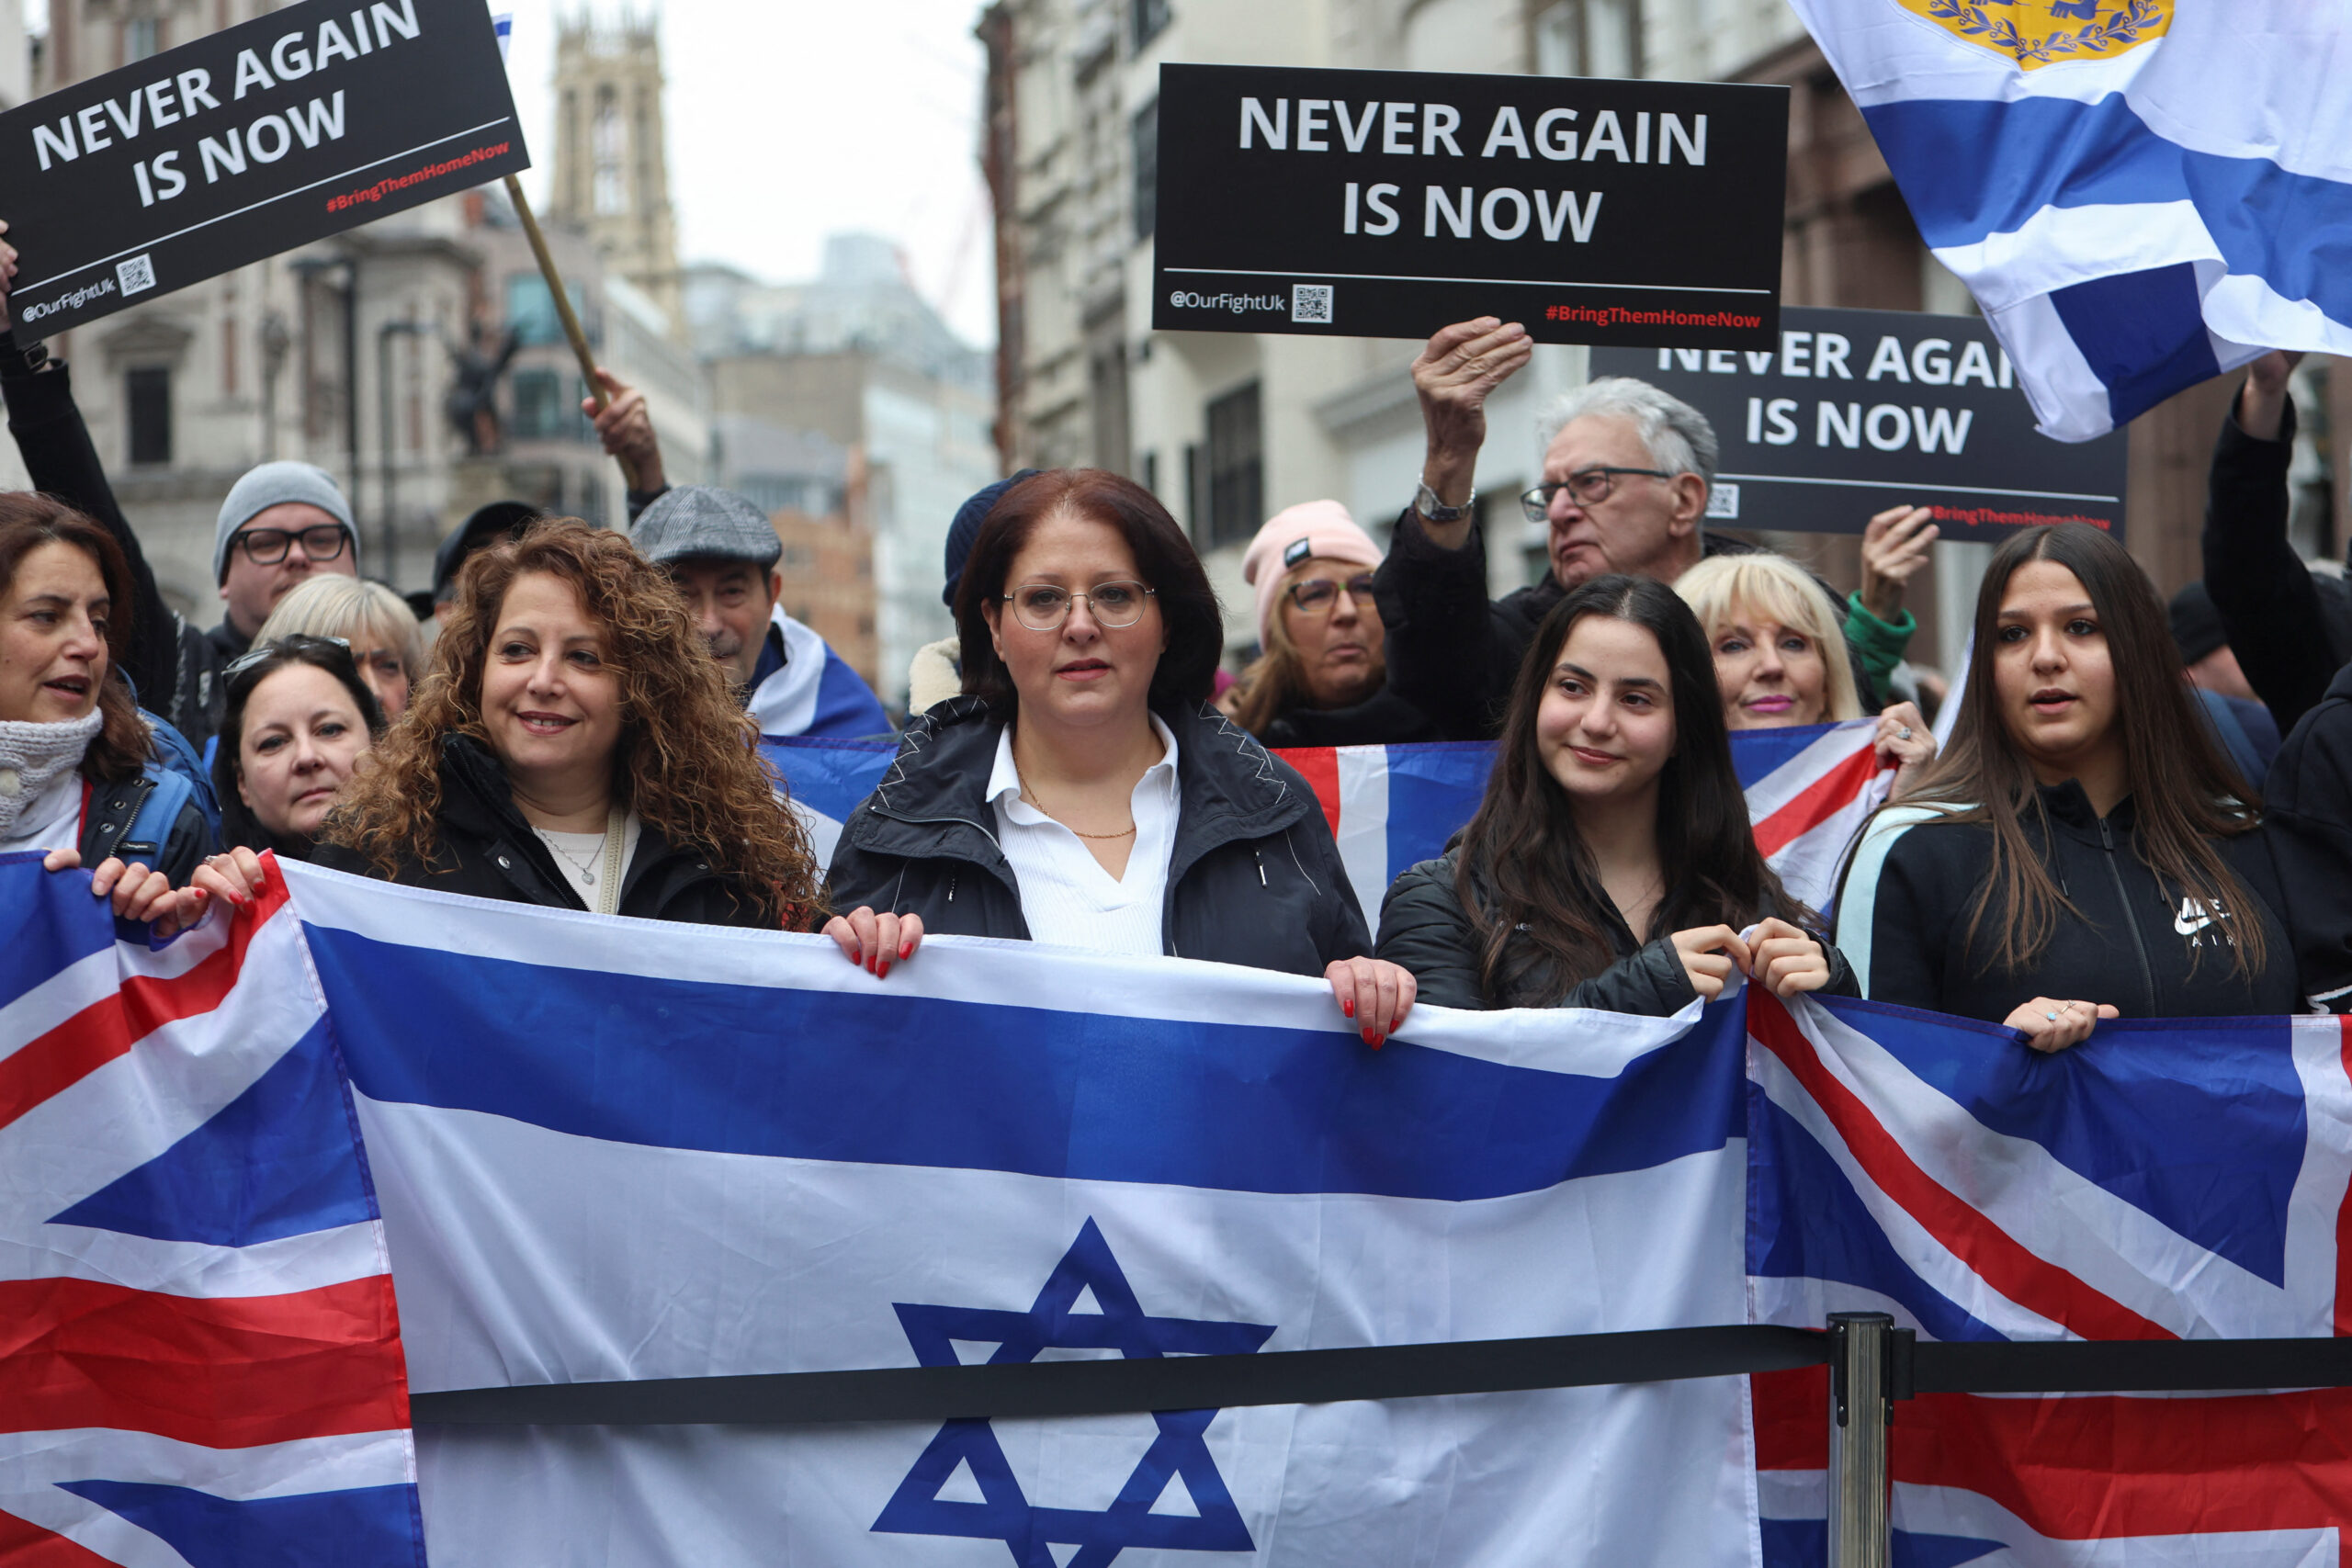 March against antiSemitism on the streets of London